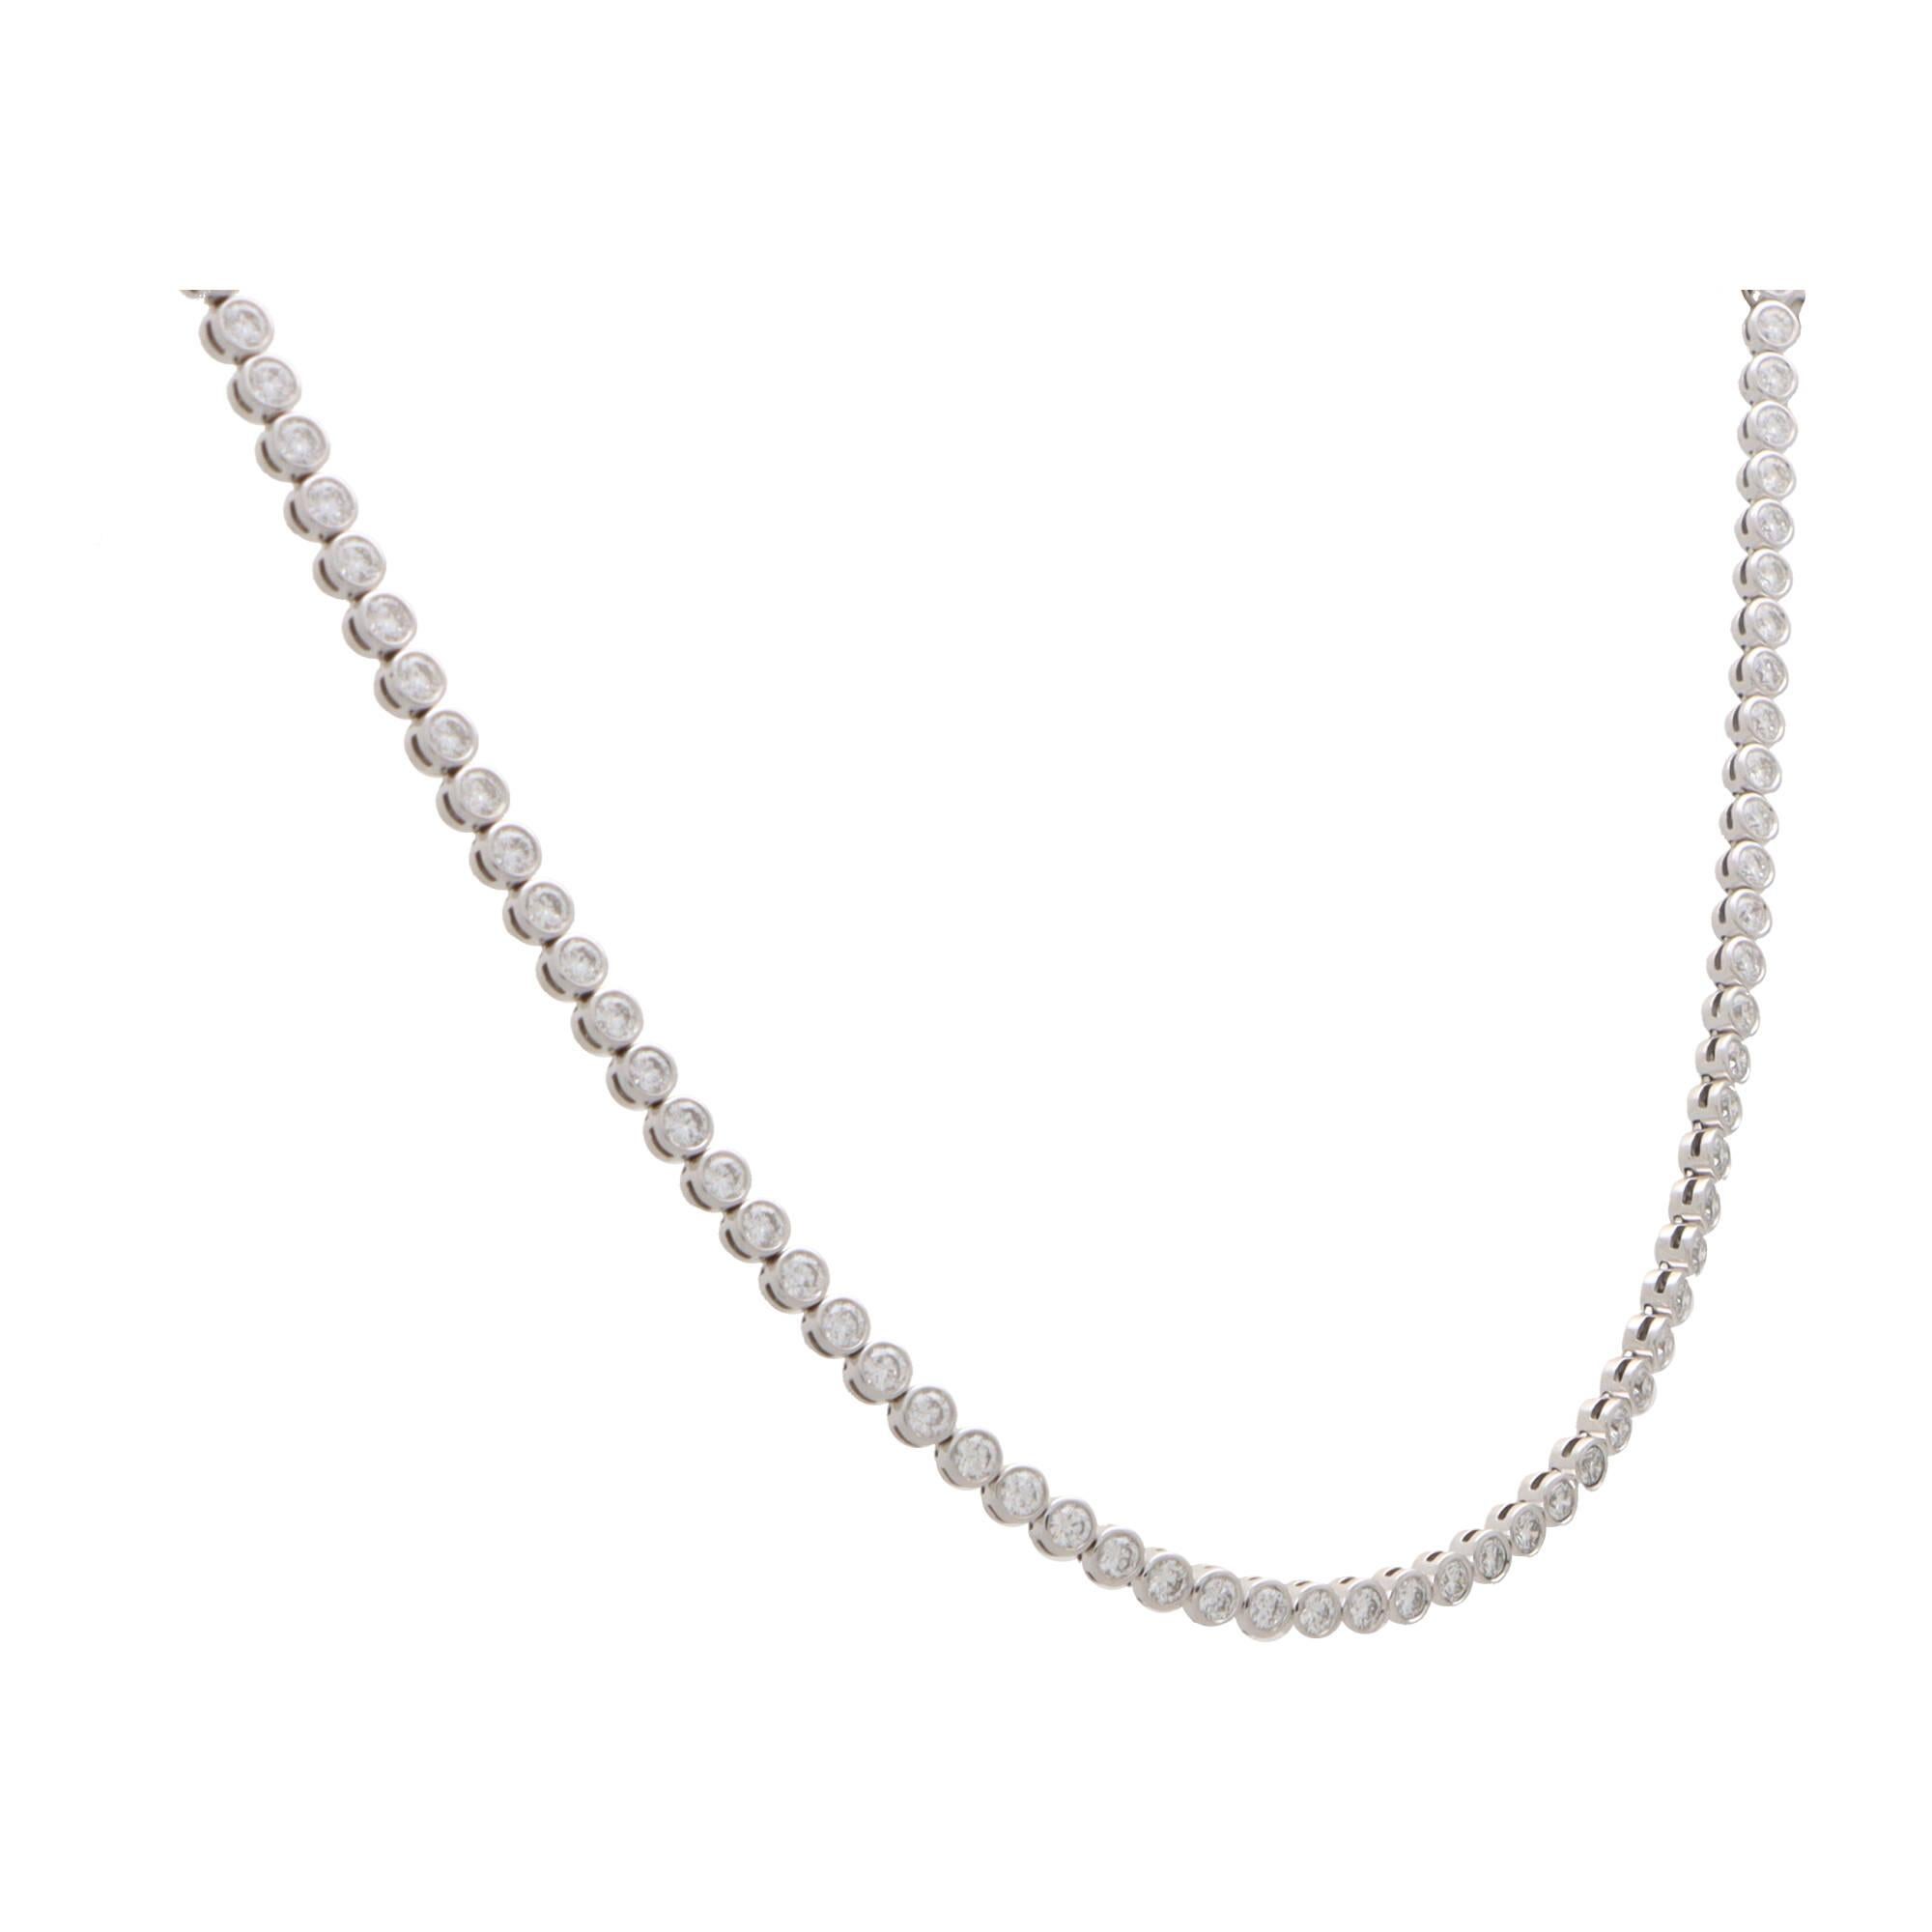 A beautiful vintage De Beers diamond riviere necklace set in 18k white gold.

The necklace is composed of a staggering total of 218 diamonds all of which are individually bezel set in round articulated settings.

Due to the design this necklace